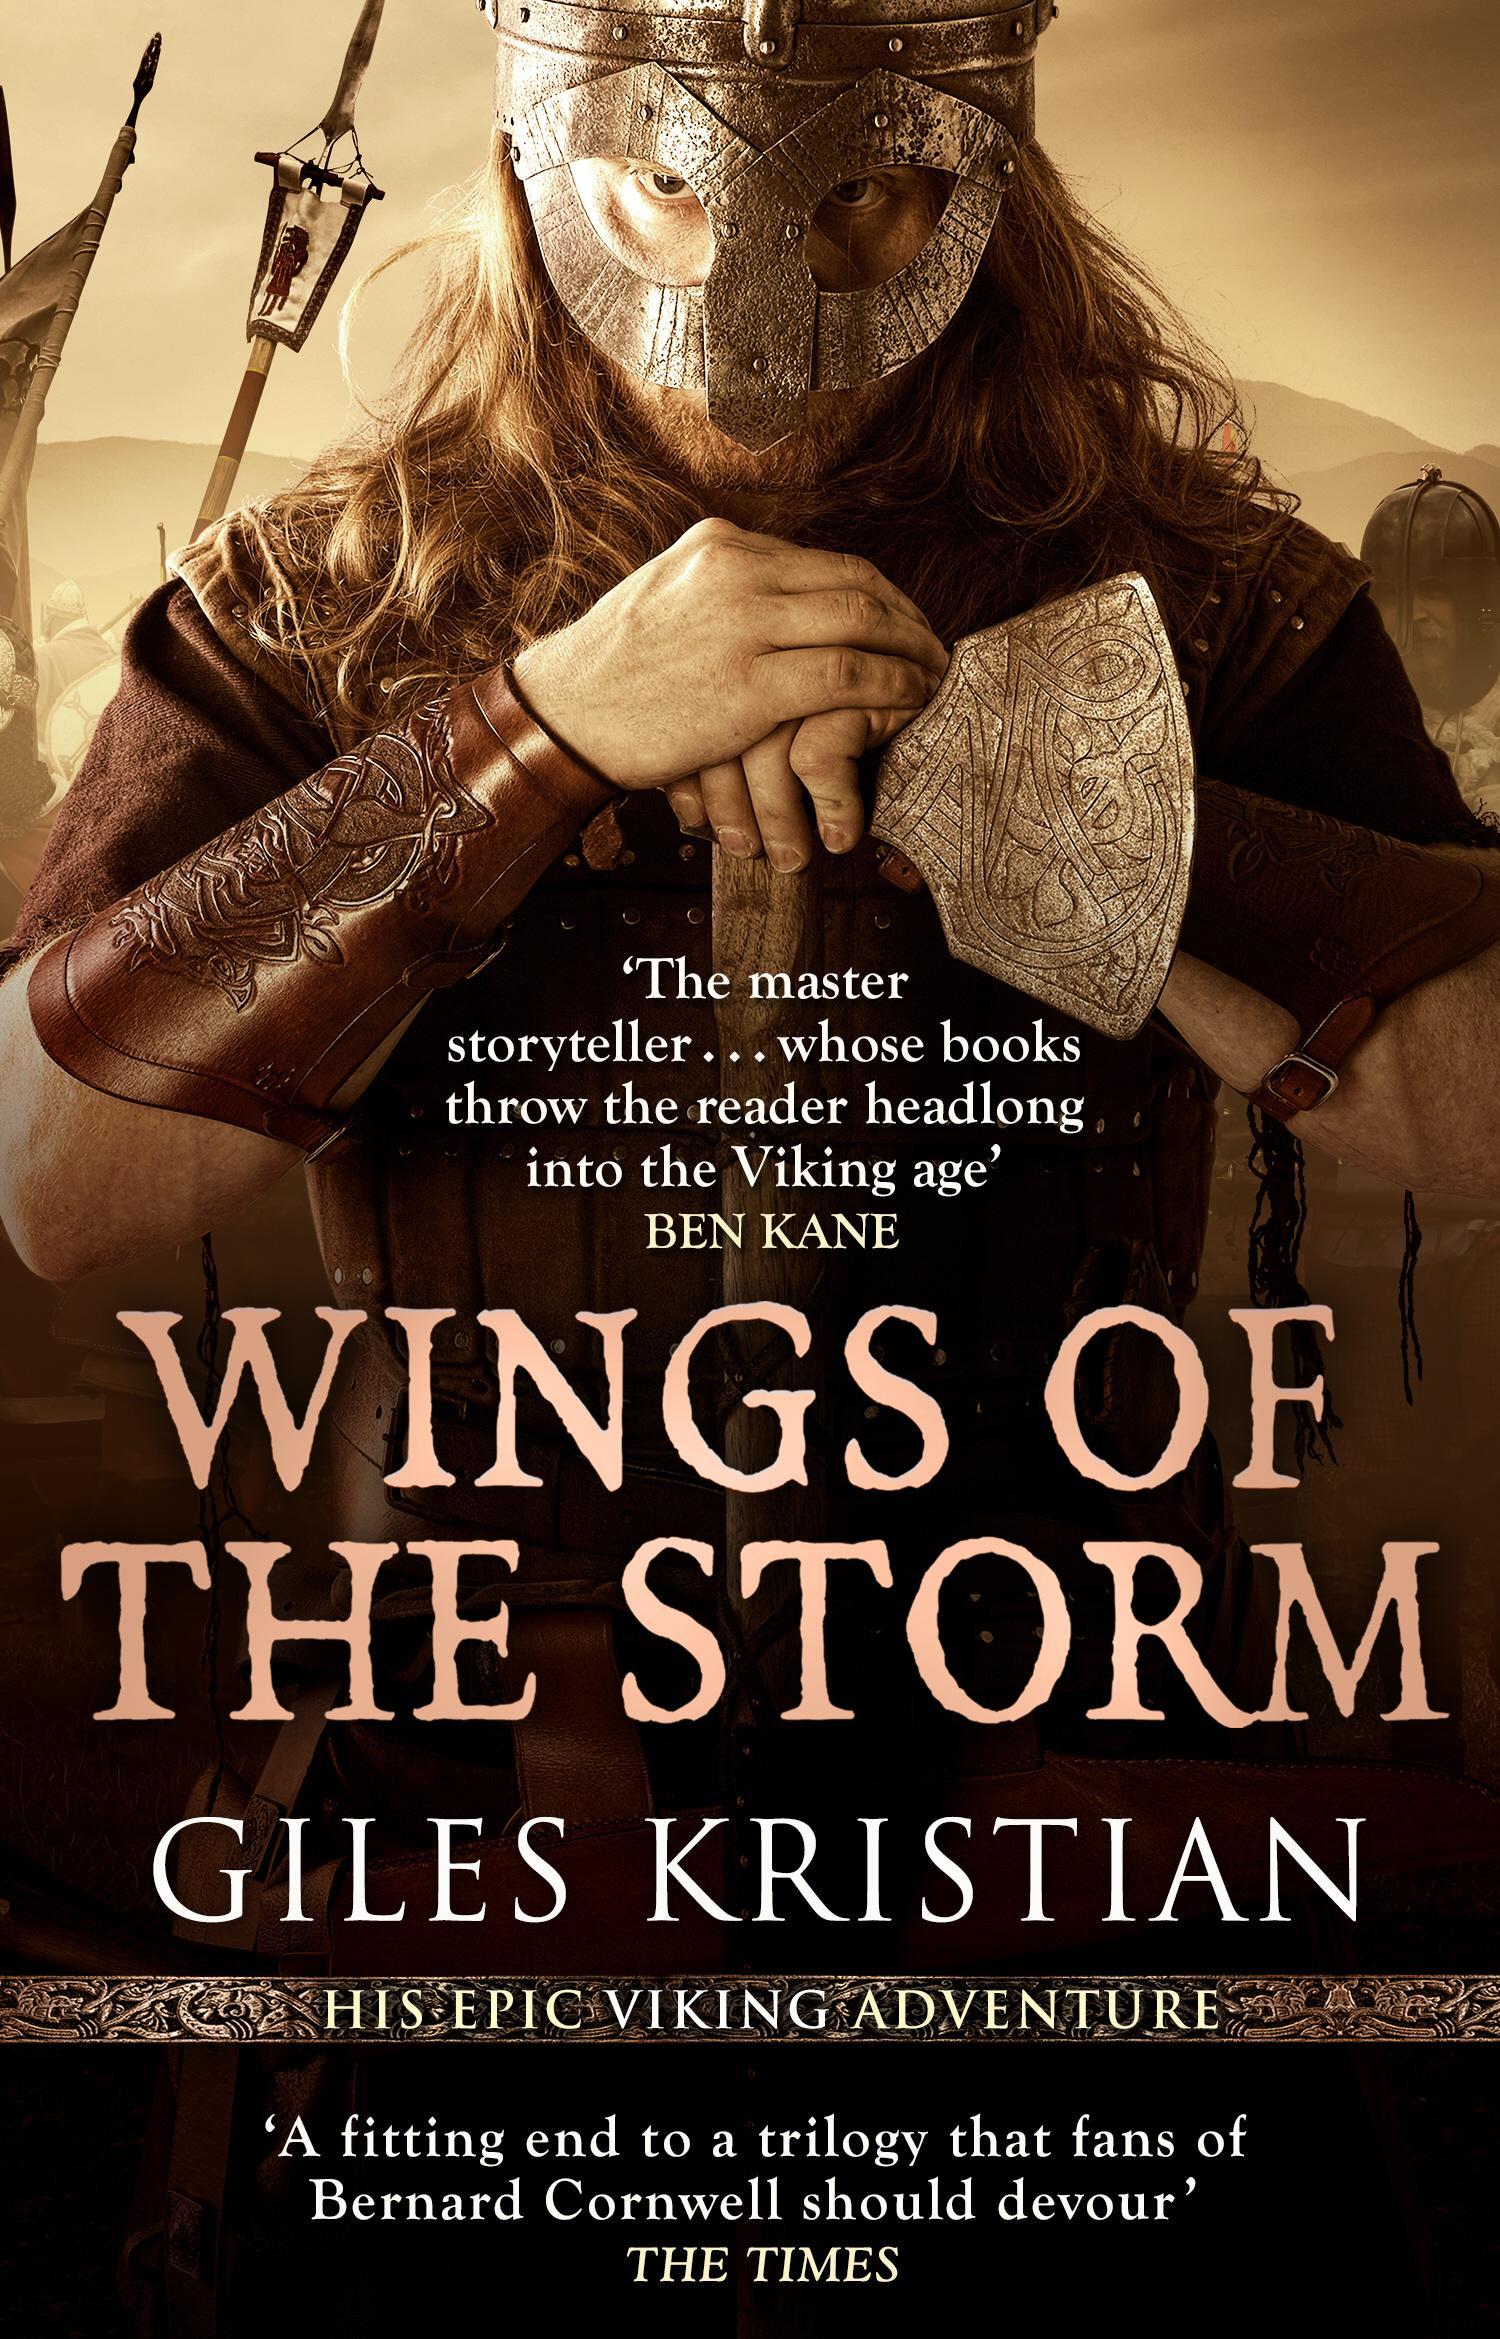 Wings of the Storm - Giles Kristian